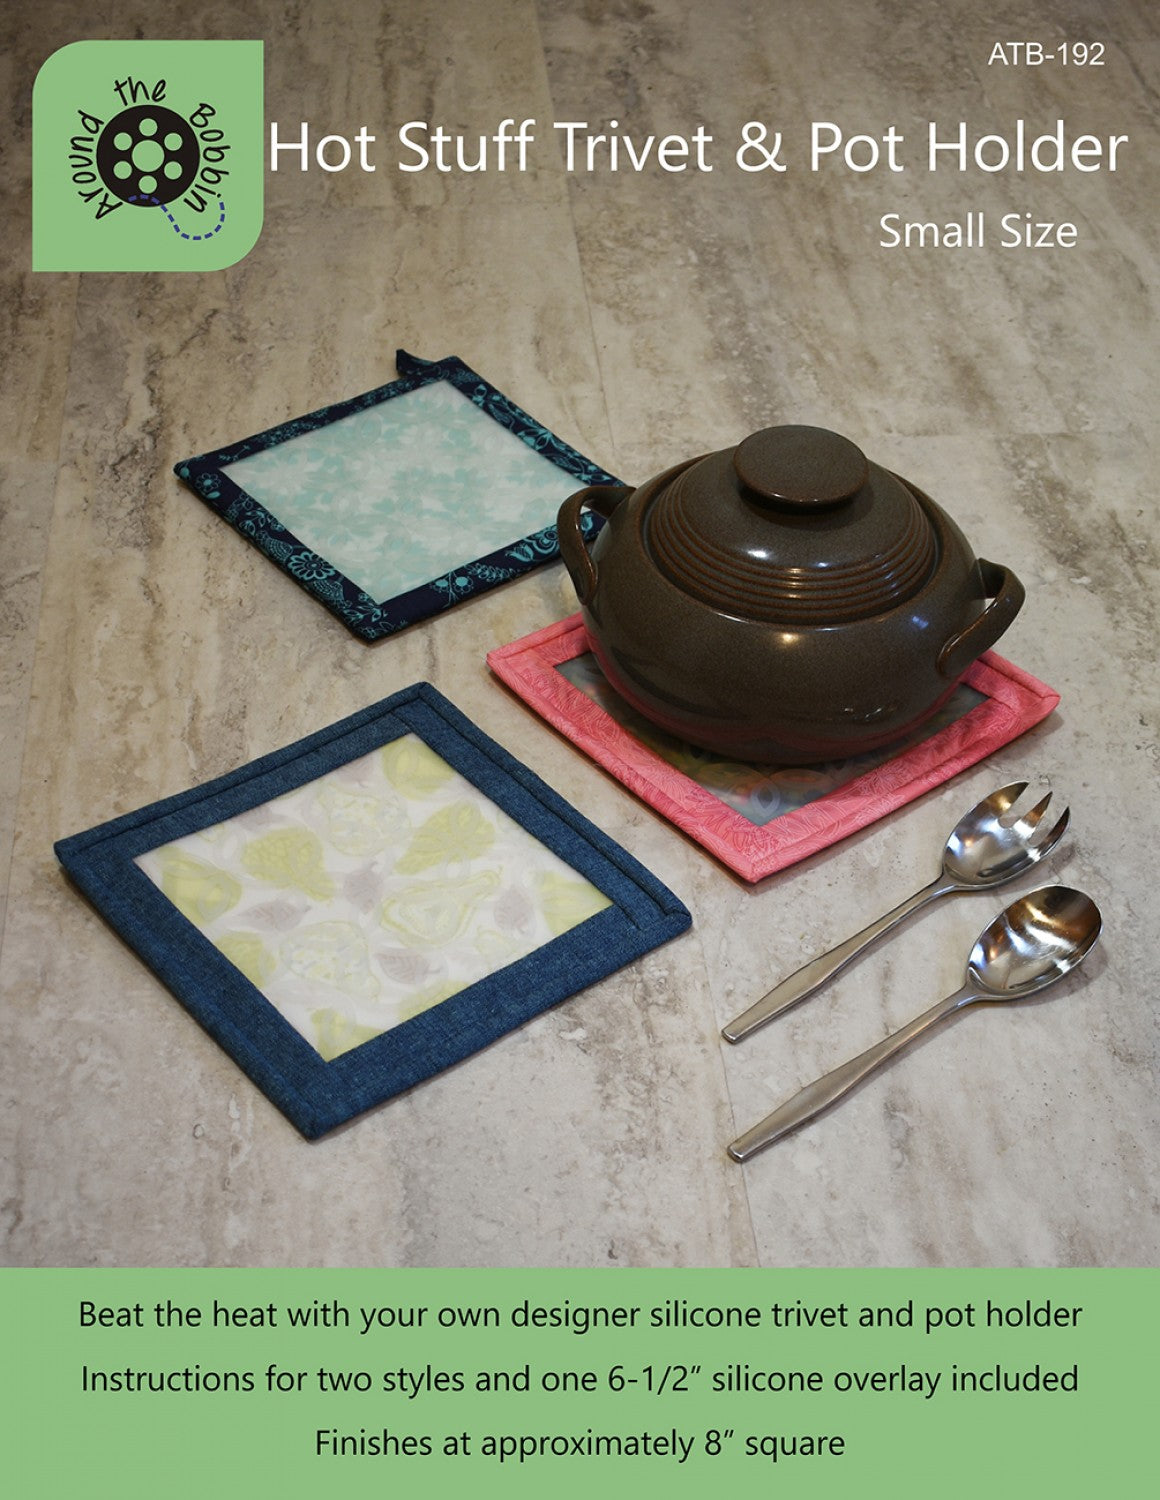 Refill - LARGE Silicone Trivet and Pot Holder by Around the Bobbin